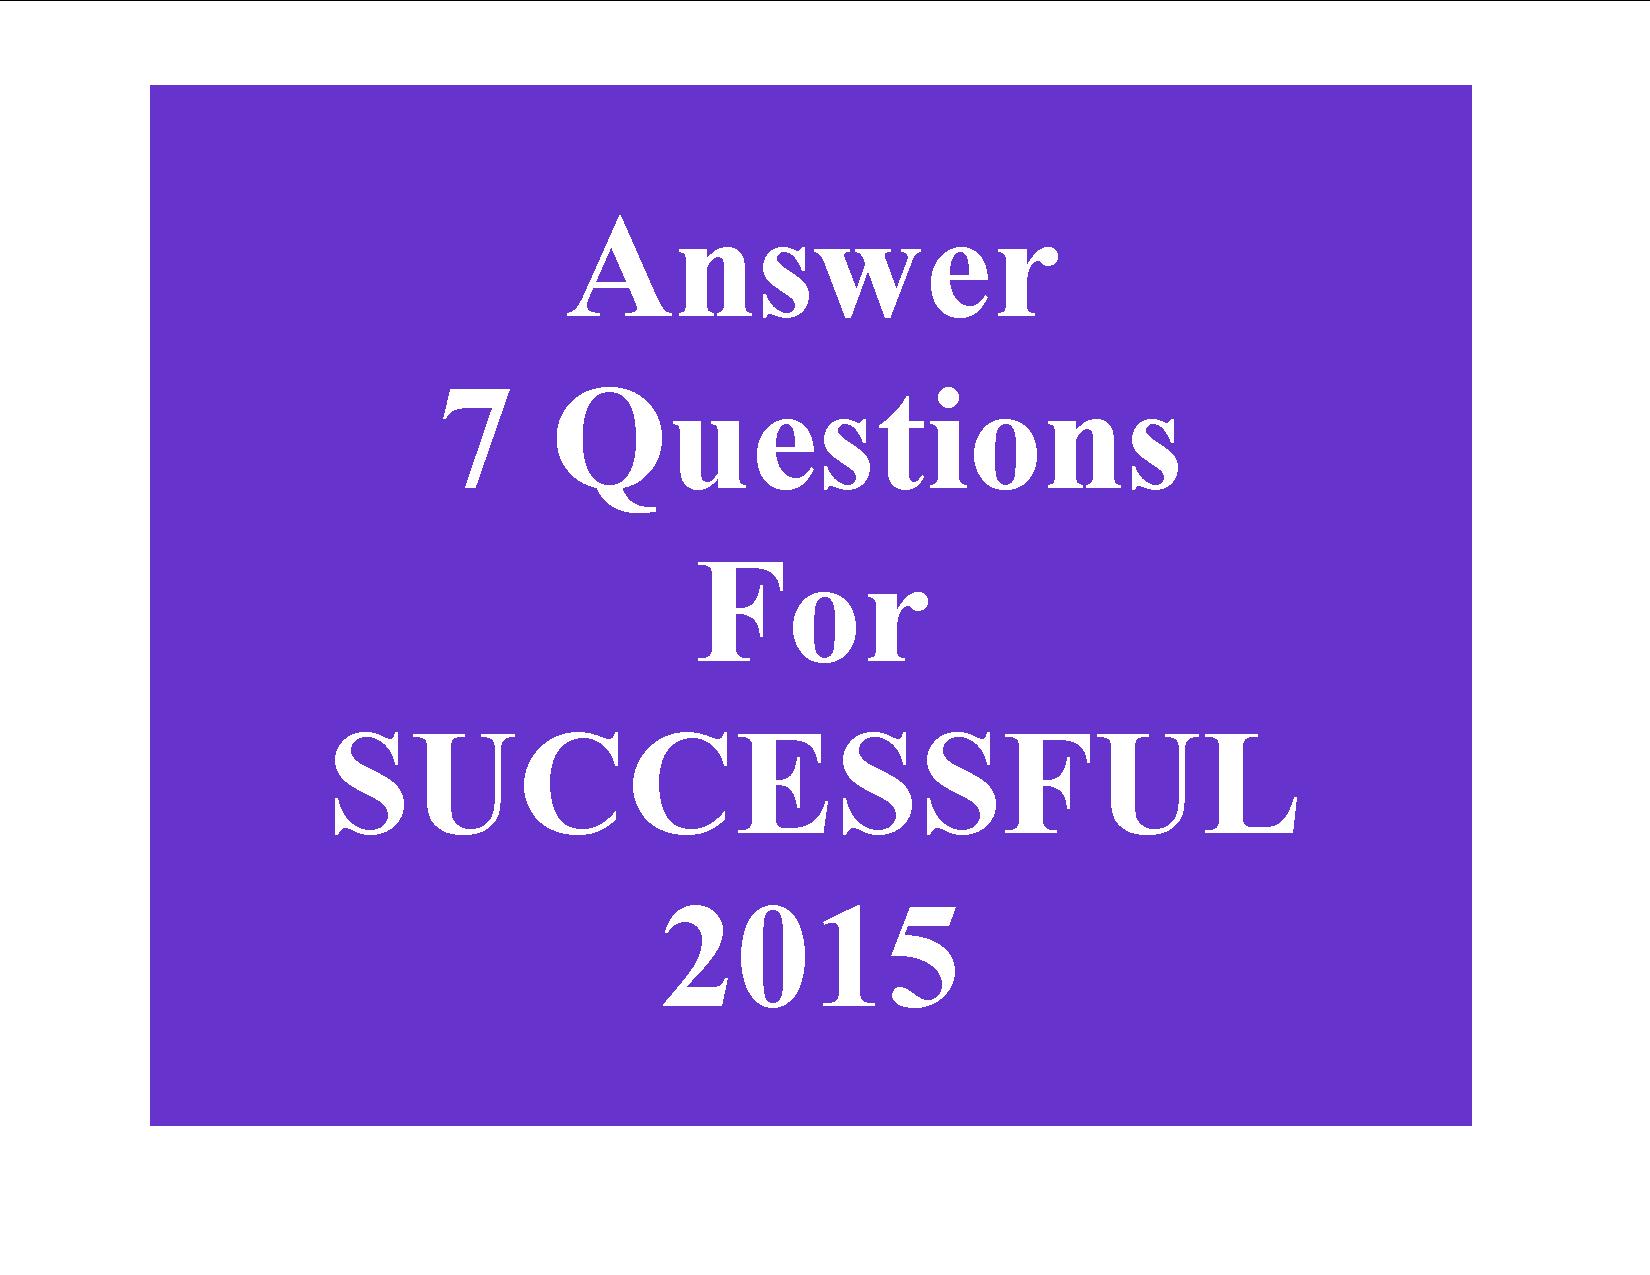 7 questions for a successful year